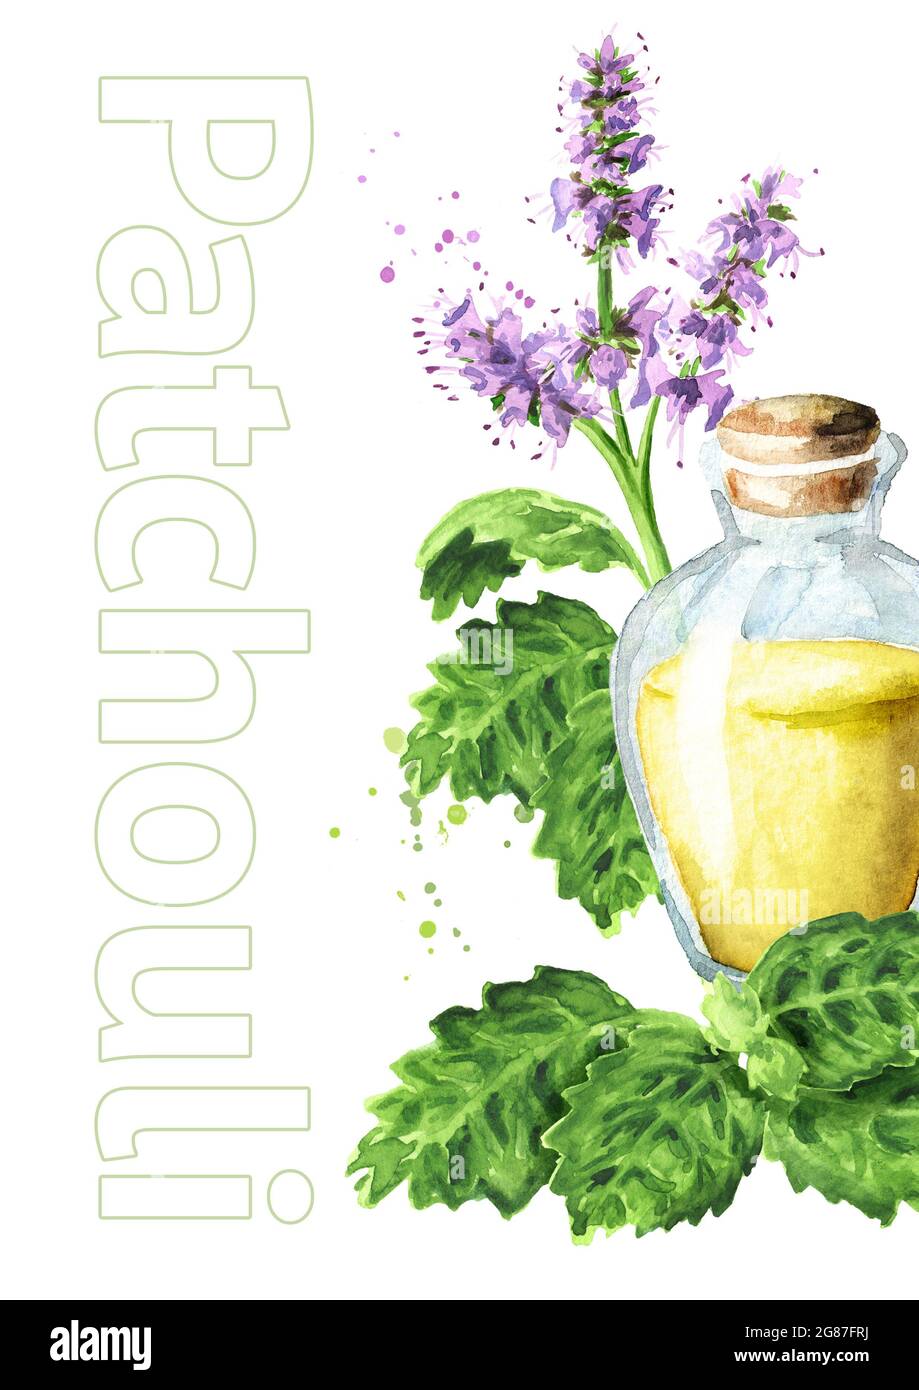 Patchouli or Pogostemon cablini essential oil card. Hand drawn watercolor illustration isolated on white background Stock Photo